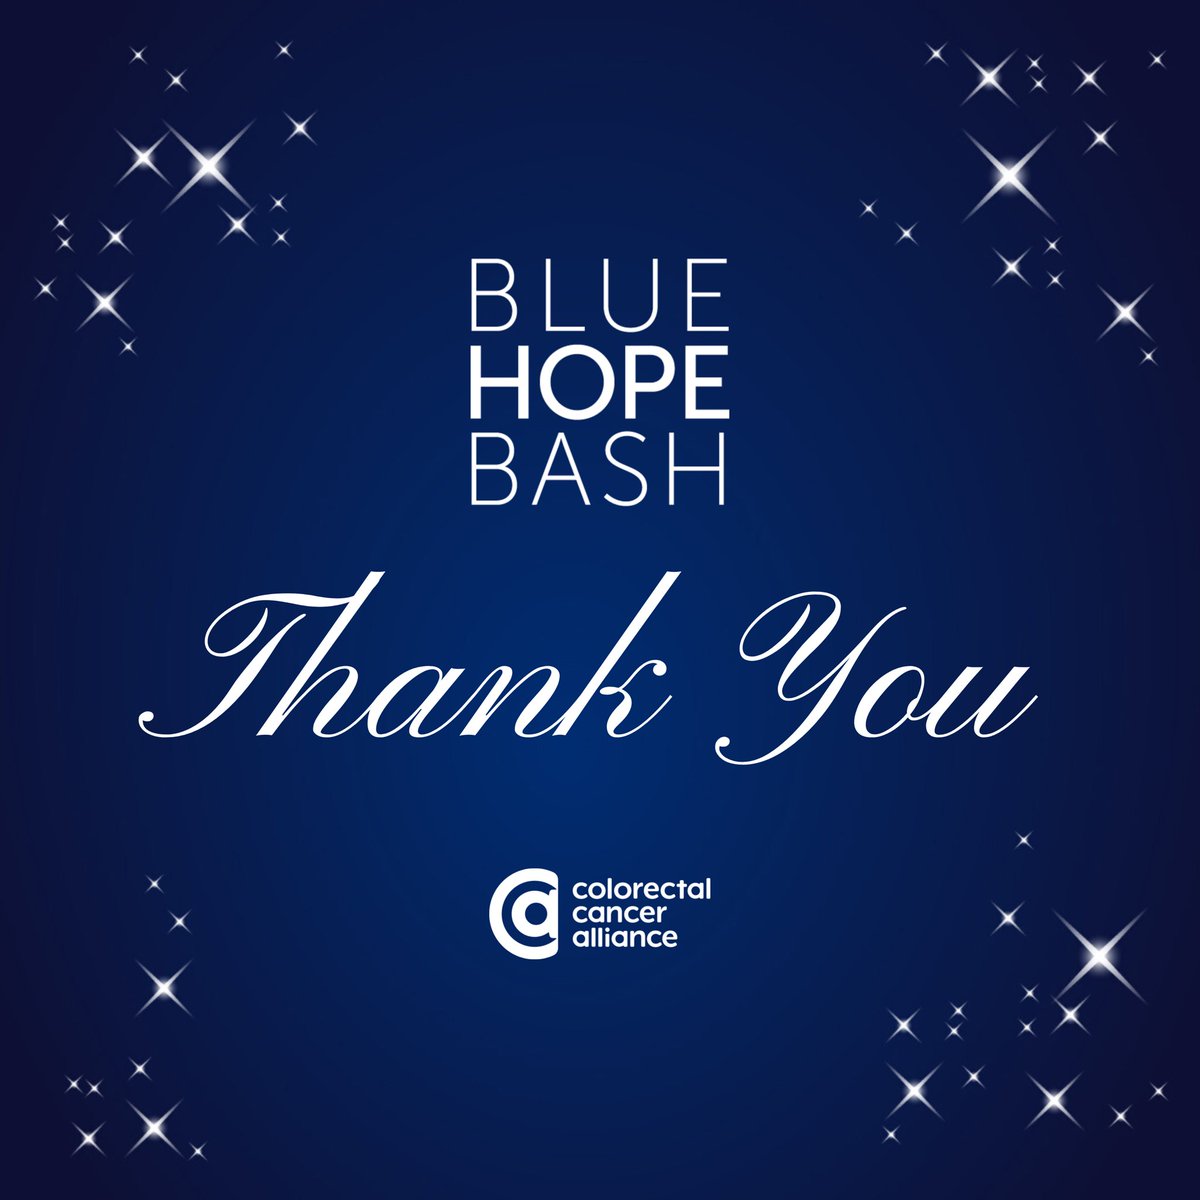 Thank you to everyone who joined us at our #BlueHopeBash. With allies like you, we have Hope that we can end this disease in our lifetime. Make a last-minute donation at bit.ly/22BHBDonateTW